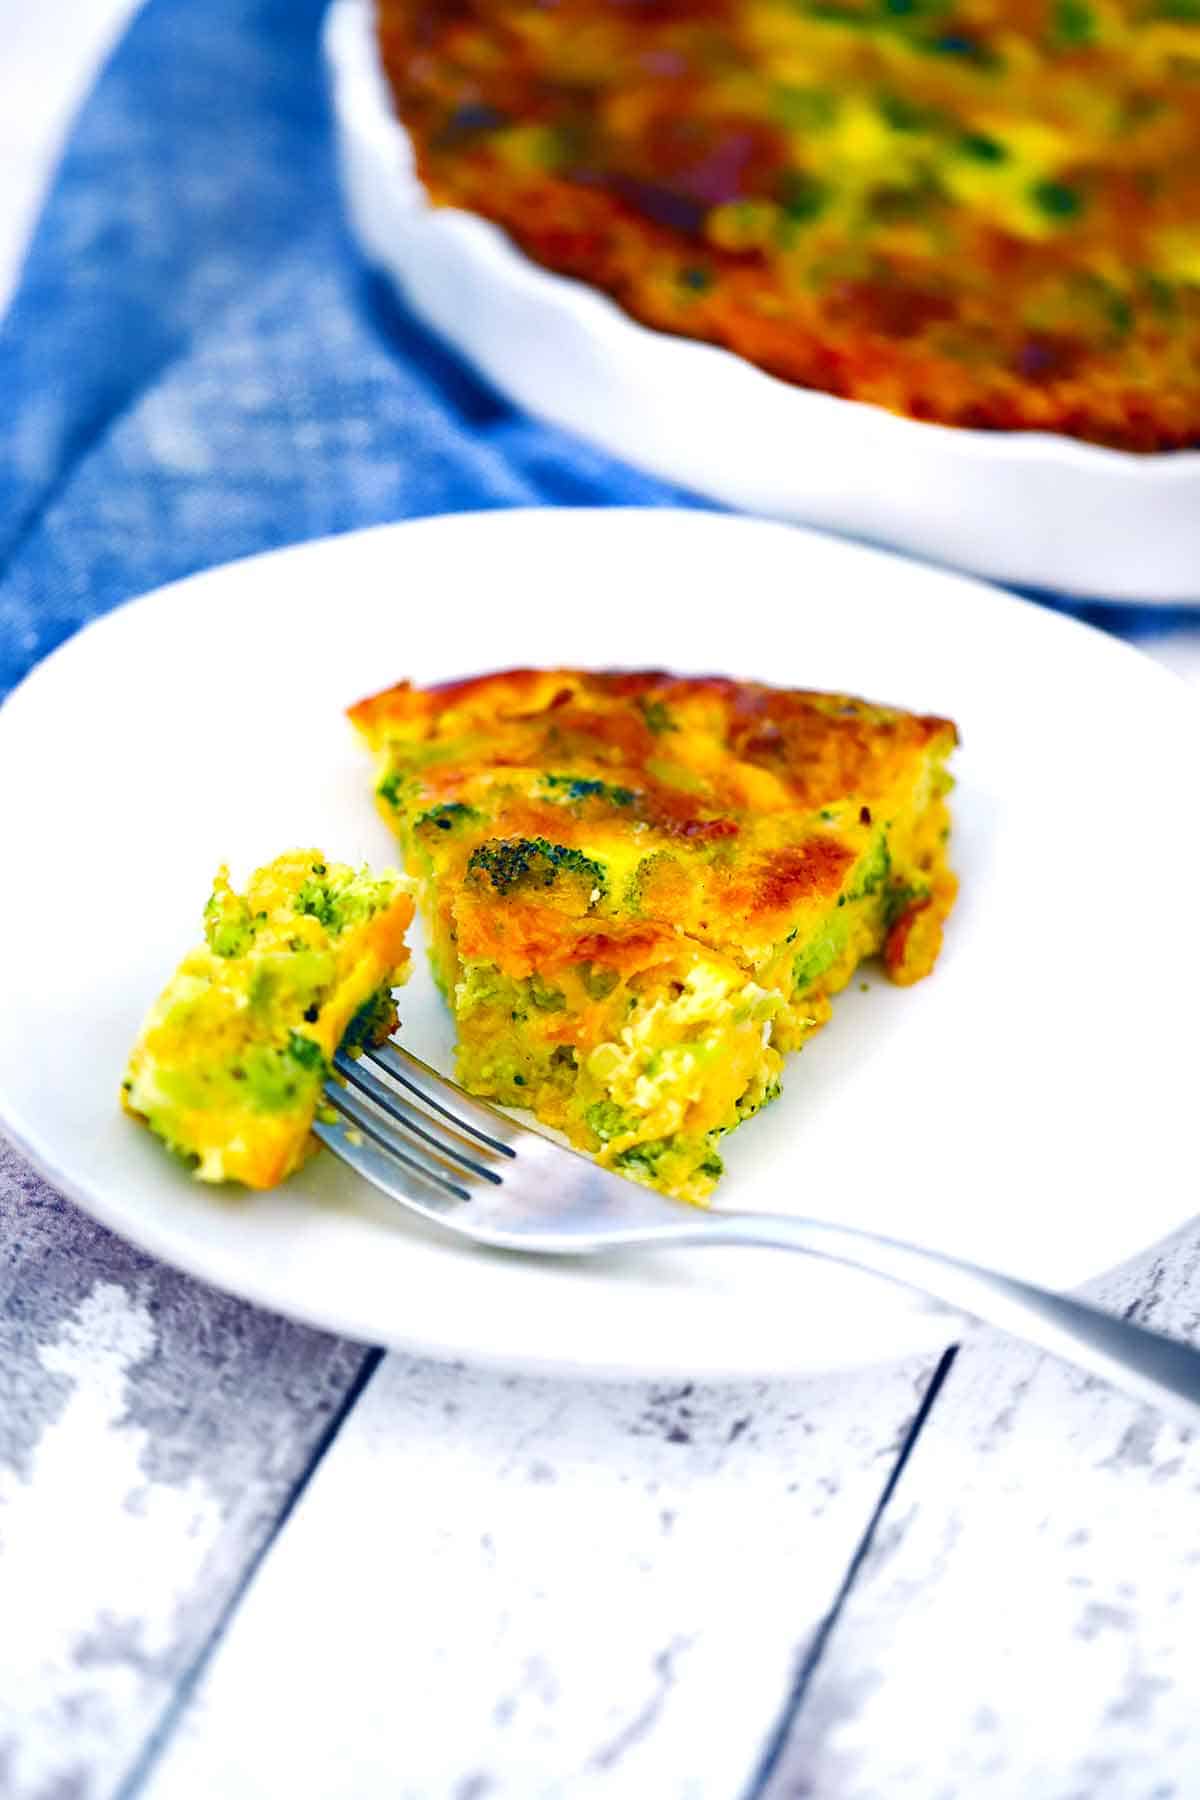 A plate with a slice of broccoli quiche and a fork taking a bite out of it.